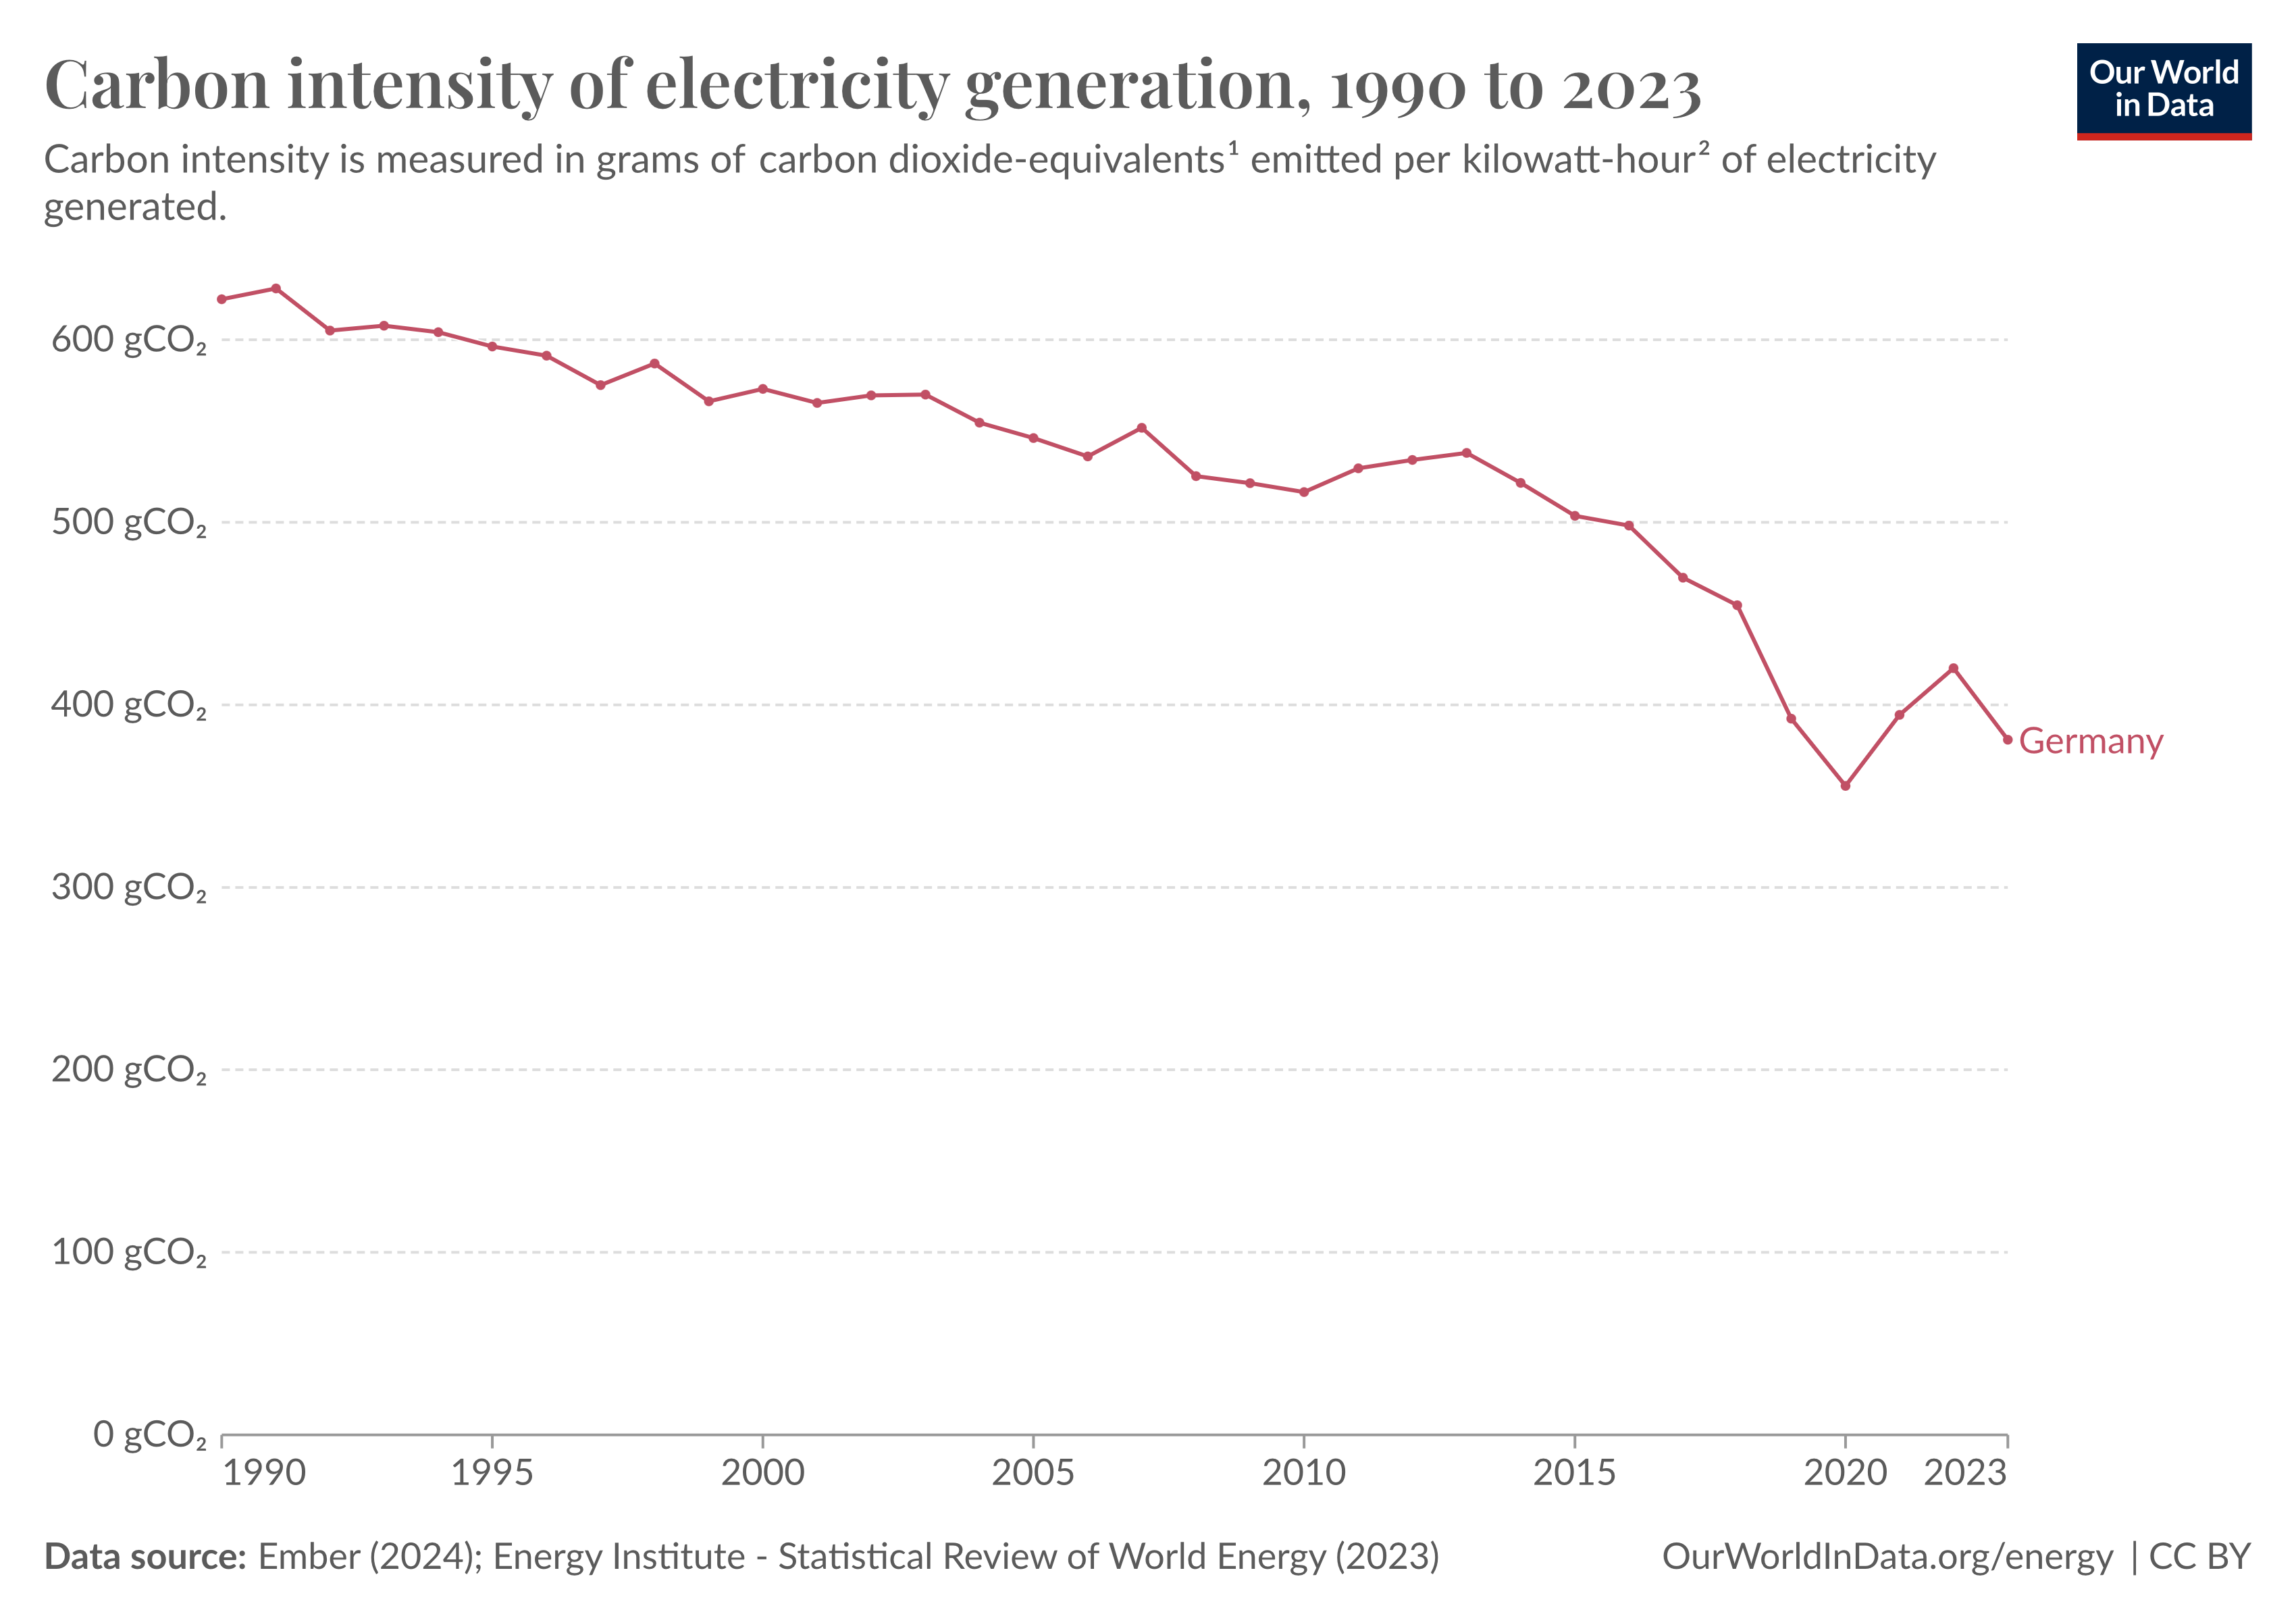 Carbon intensity of electricity generation